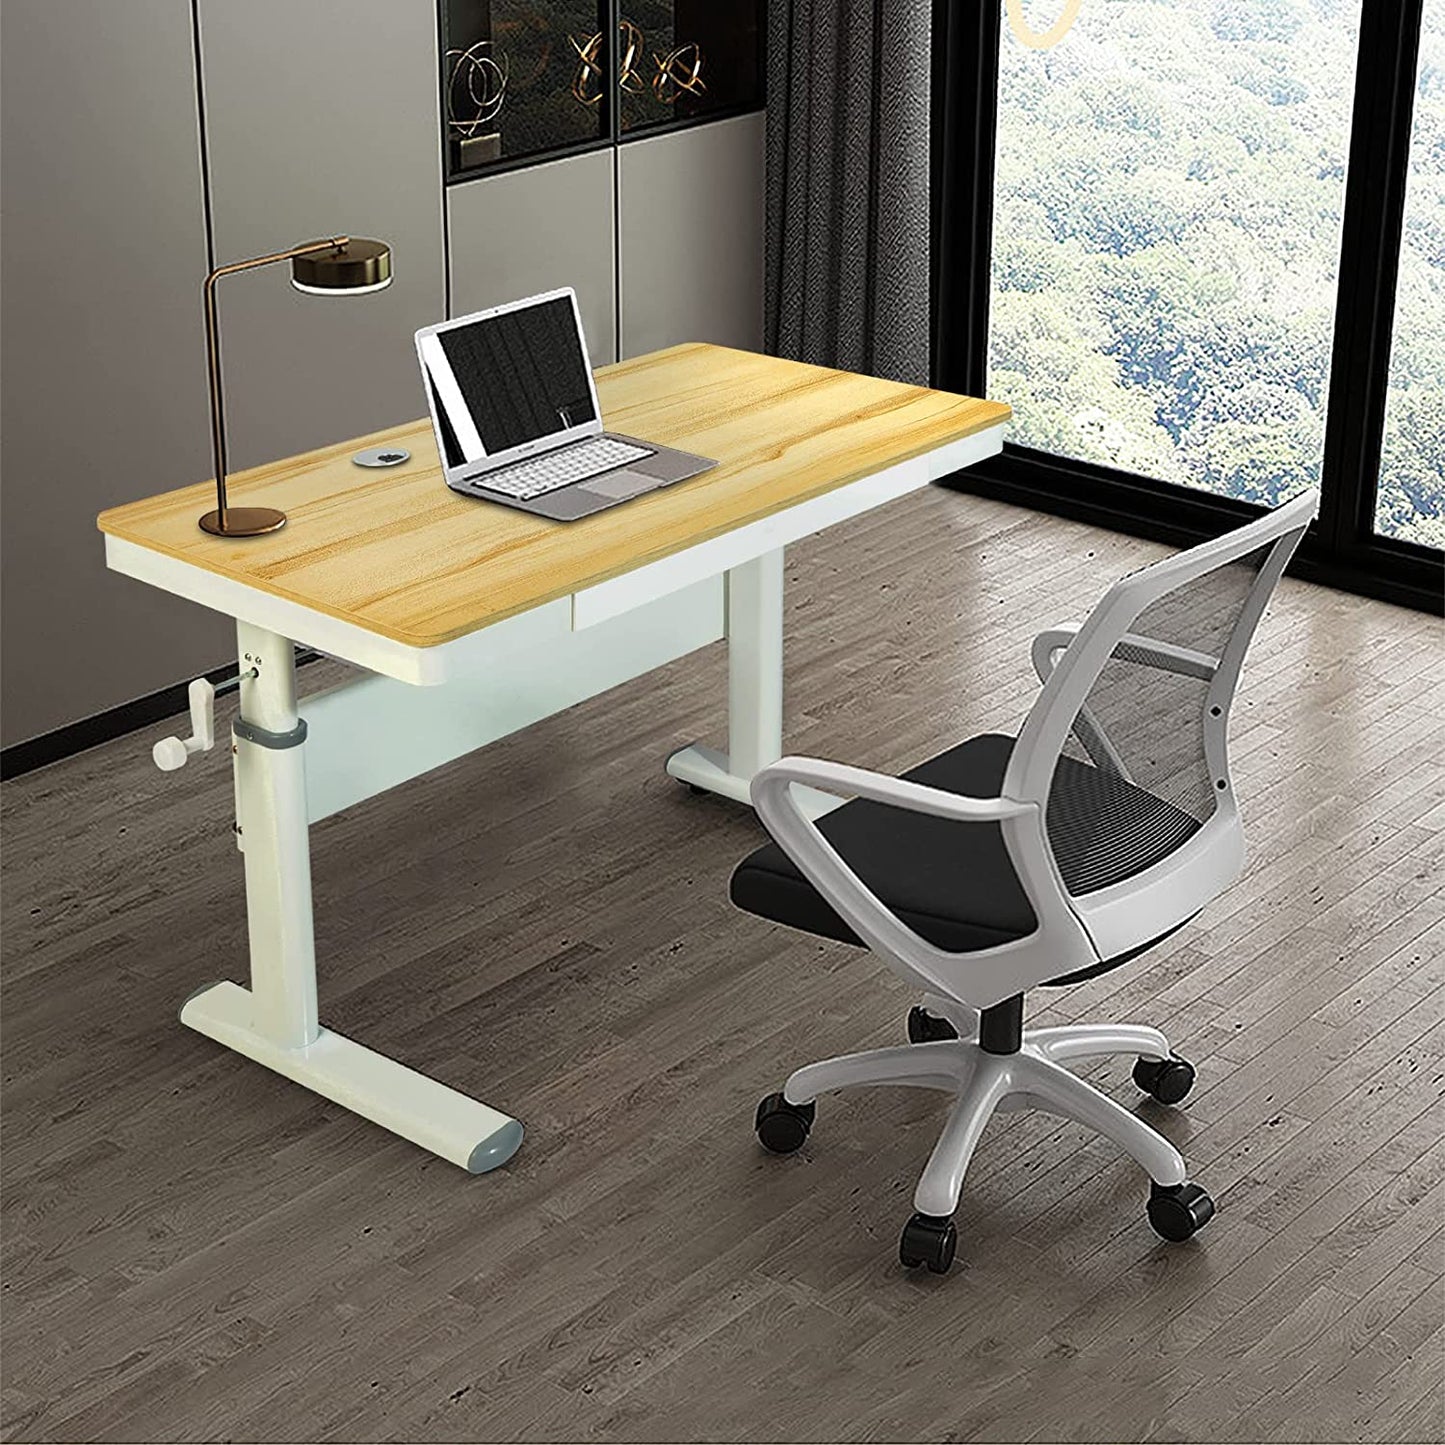 Manual Height Adjustable Small Desk with Drawer and Keyboard Tray, 36X20 Inch, Children Desk, Small Writing Table, Home Office Computer Desk, Students Classroom Desk